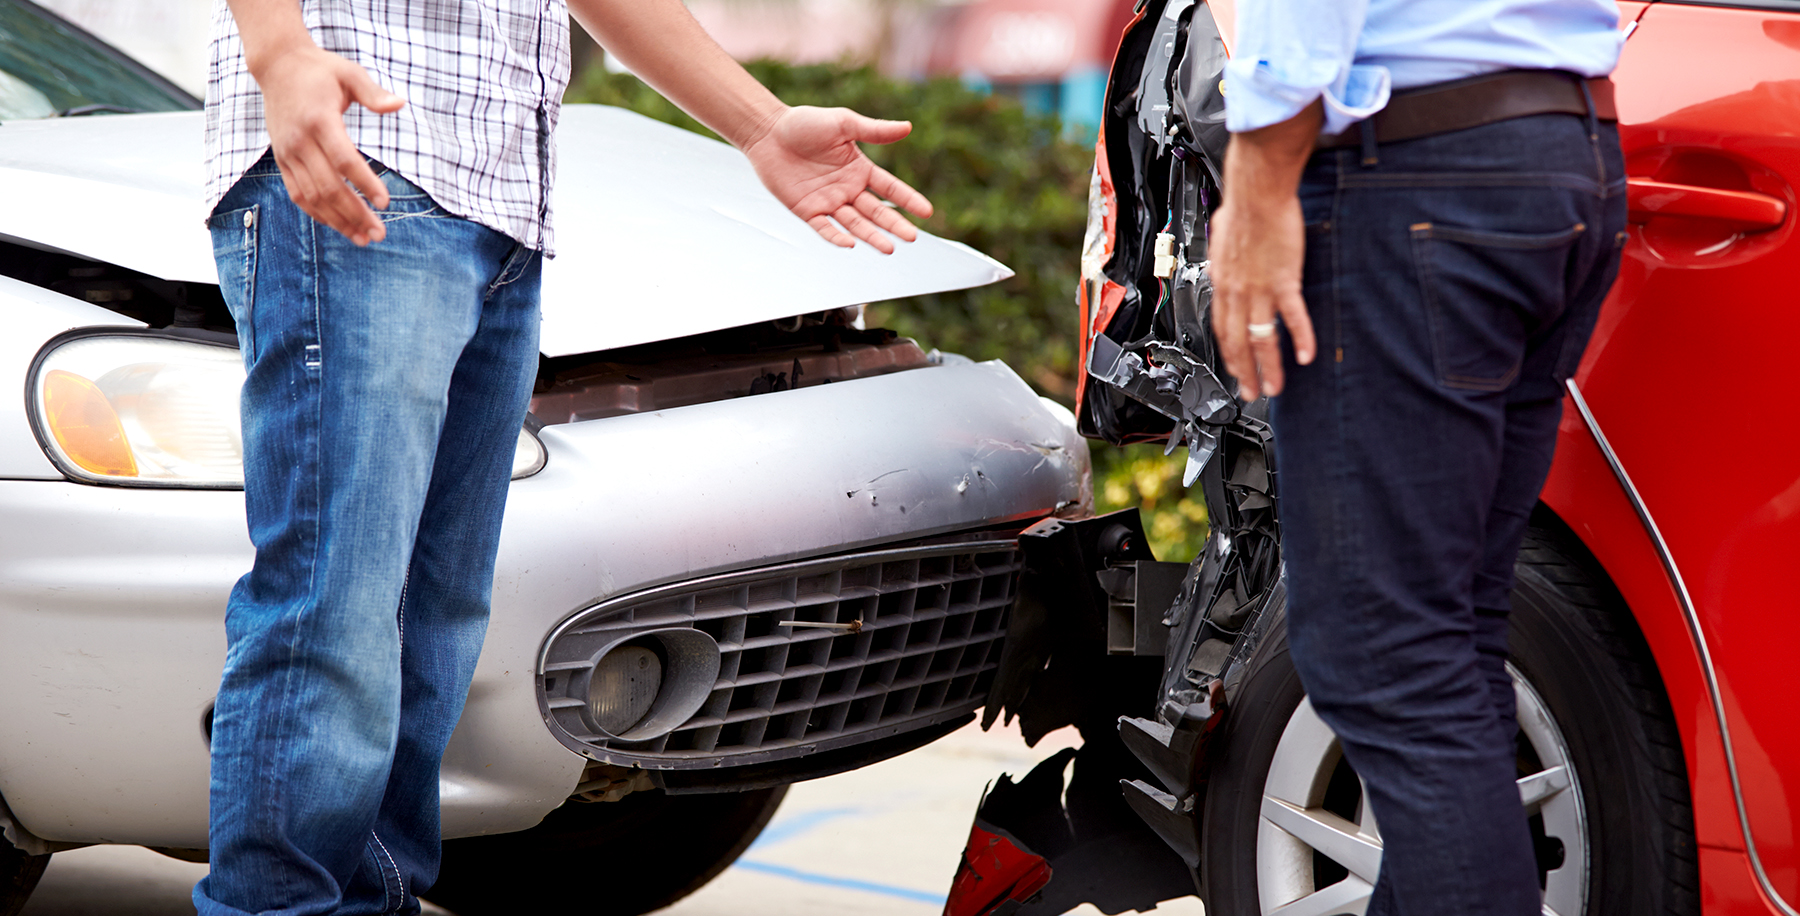 Determining Fault in Multi-Vehicle Accidents